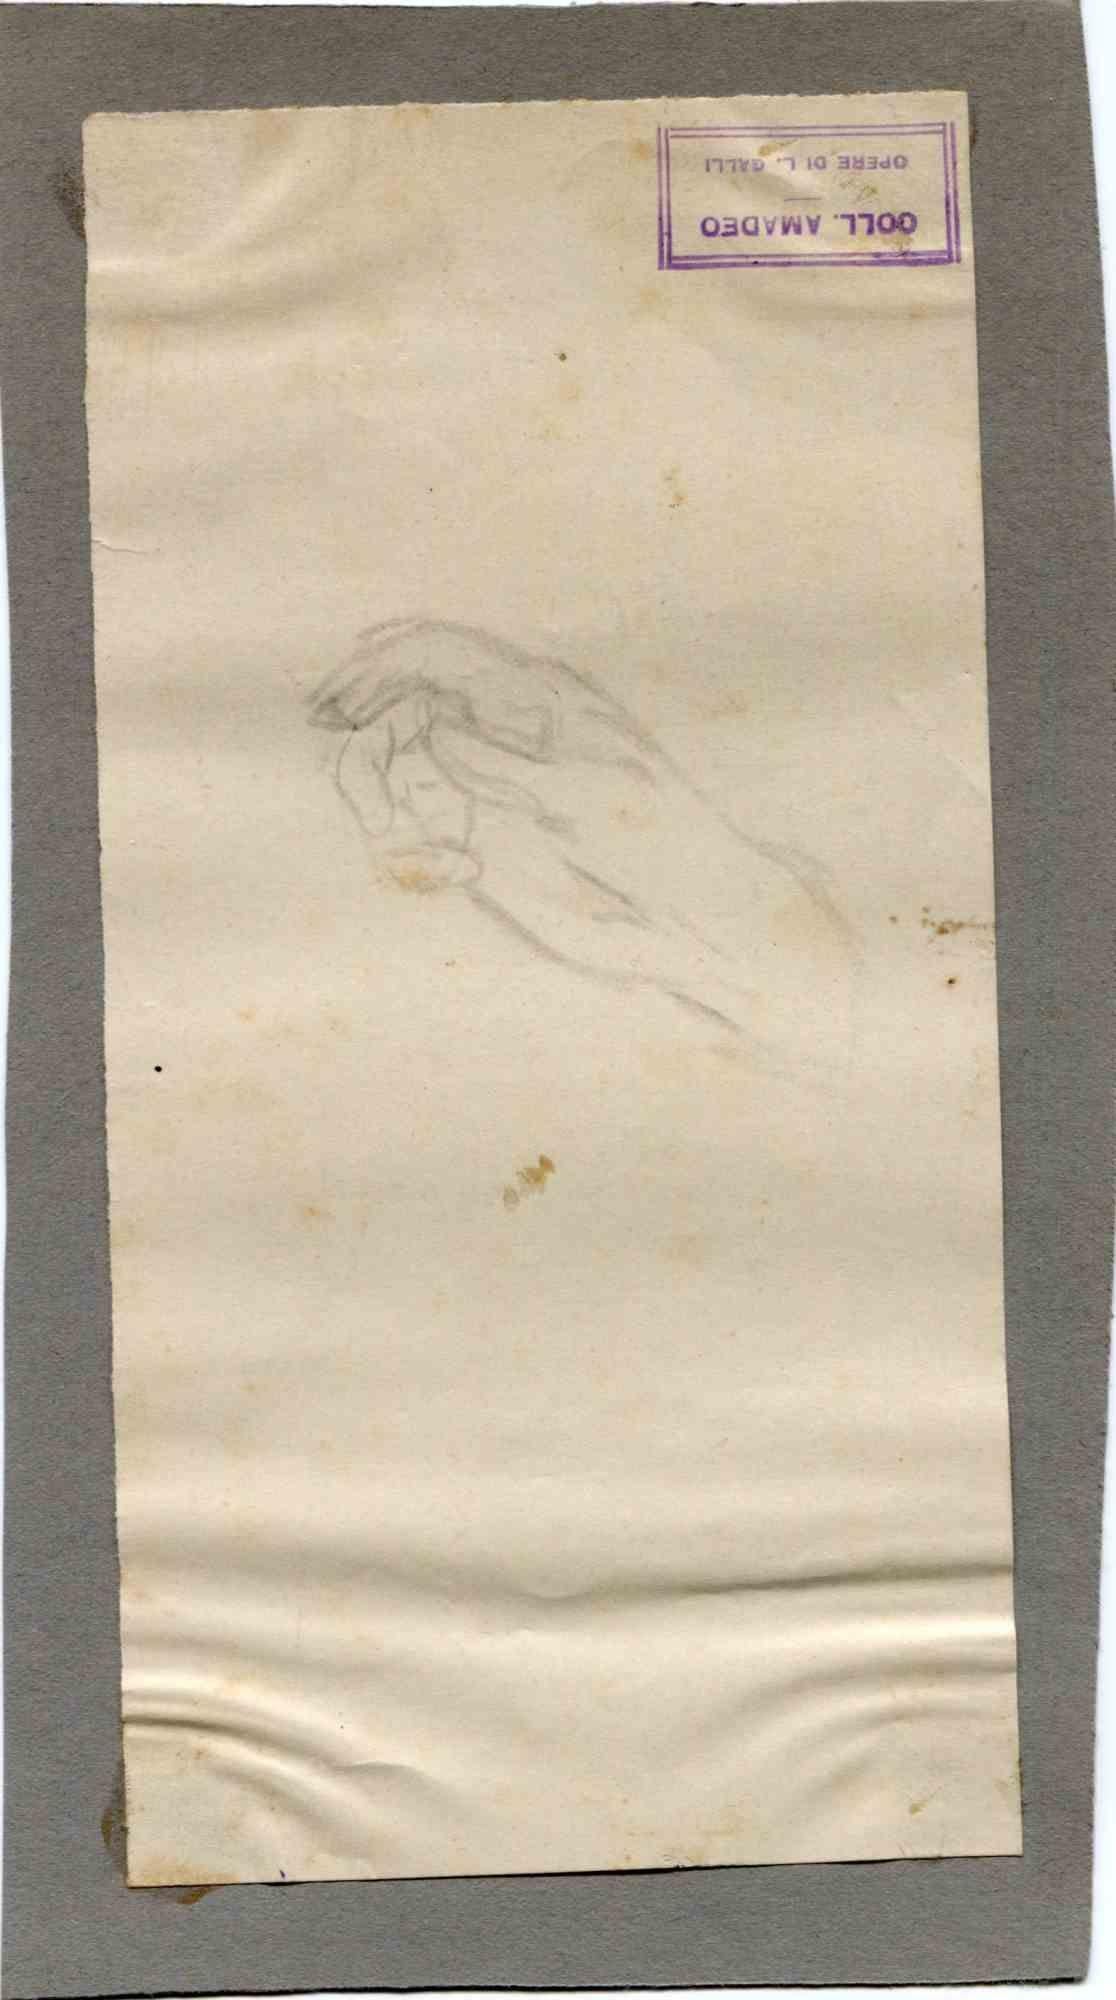 The Hand is an original drawing realized by Luigi Galli (1820-1906) in the late 19th Century.

Stamped," Coll. Amadeo"

Good conditions but aged.

The artwork is depicted through soft strokes and perfect hatchings.